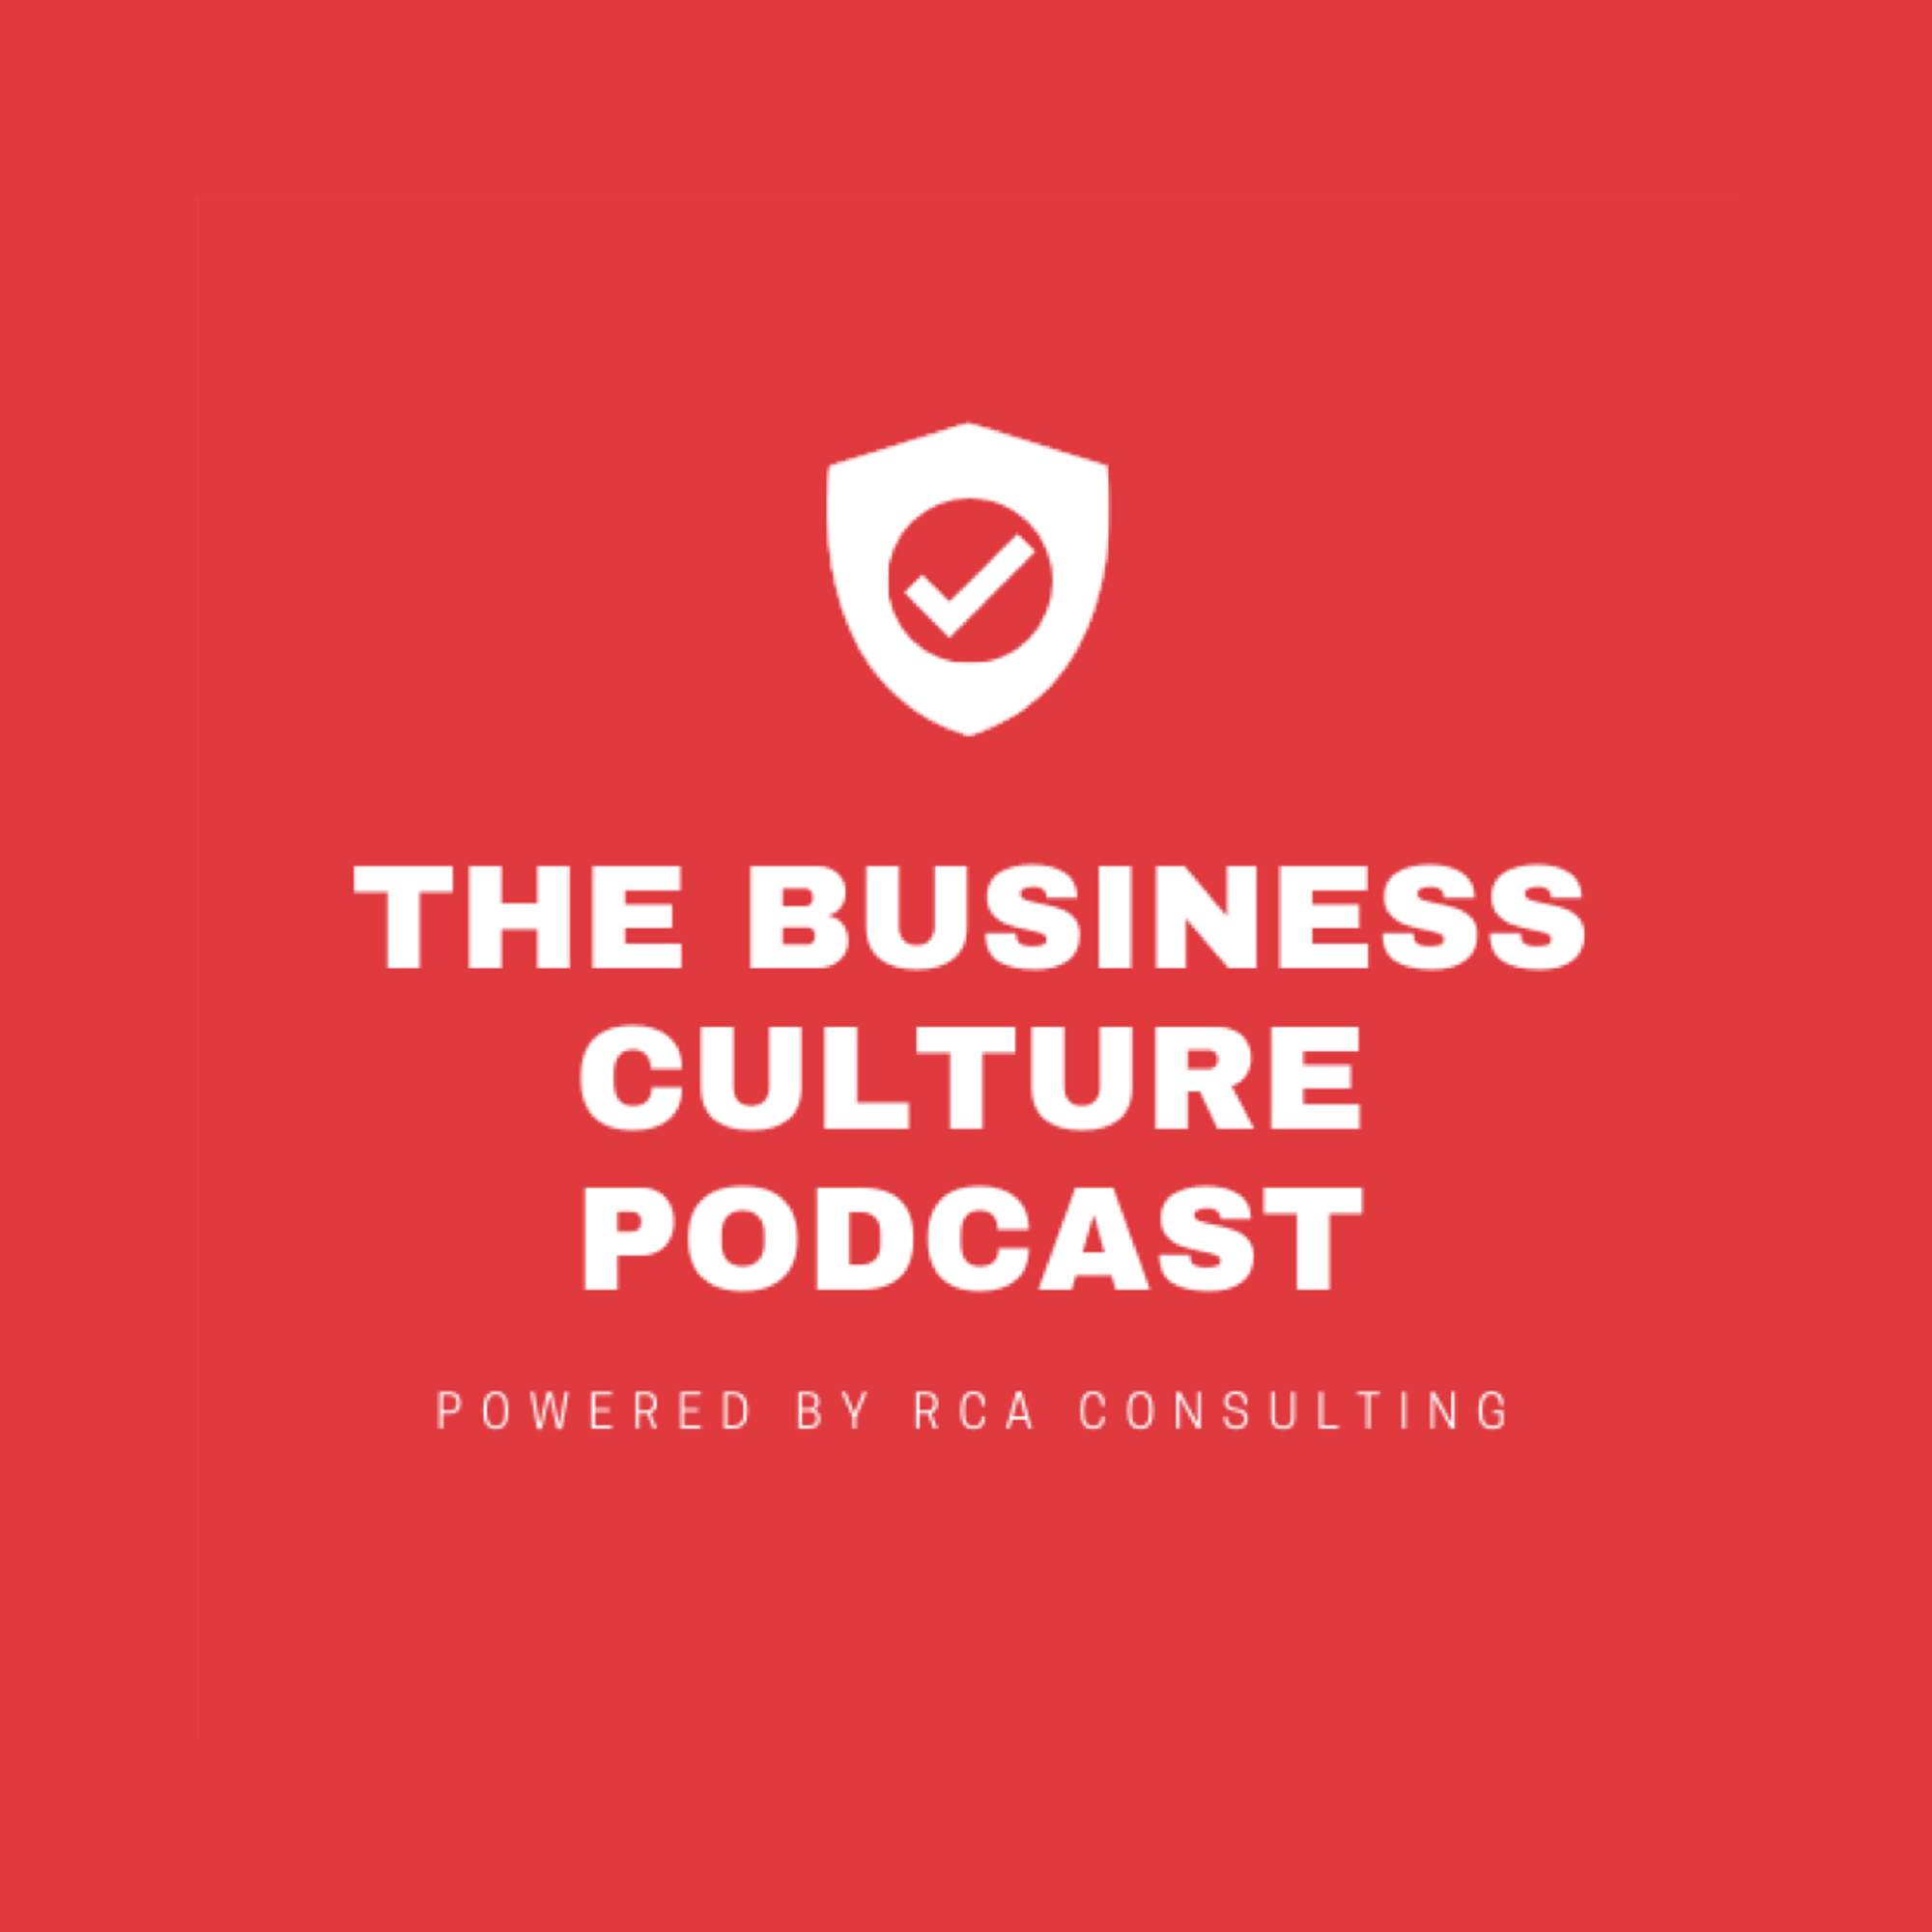 The Business Culture Podcast